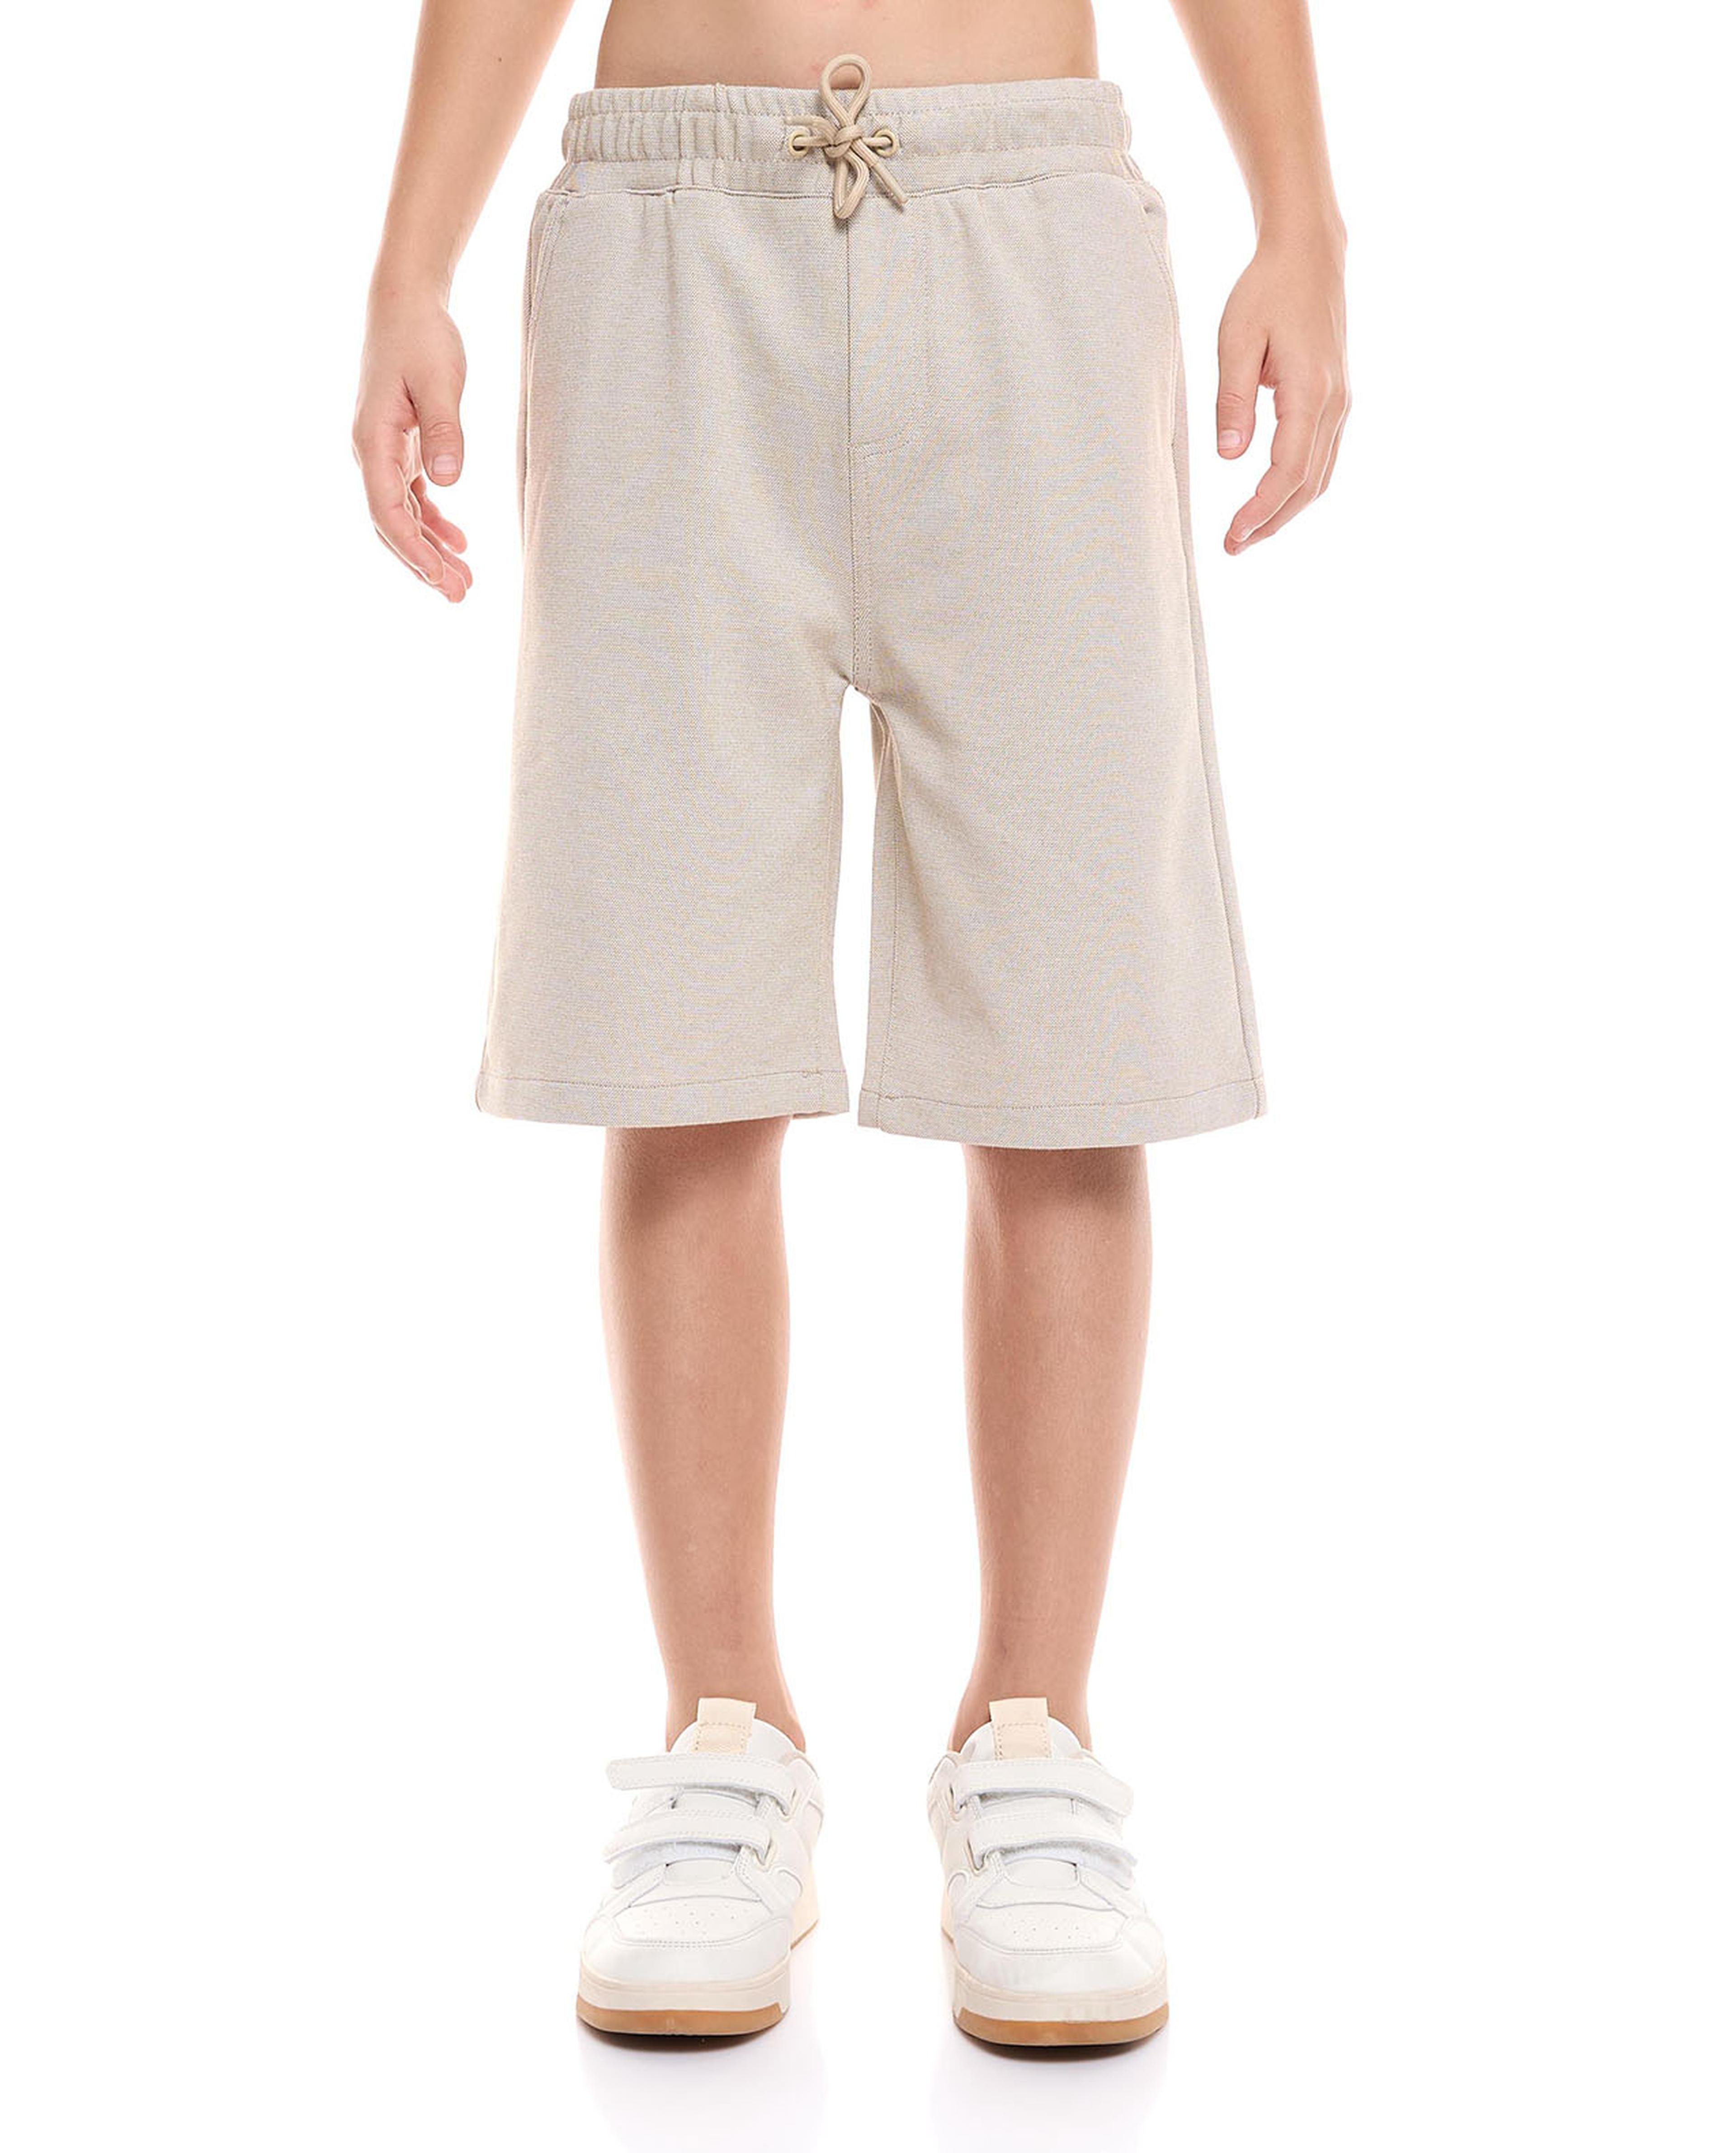 Solid Knit Shorts with Drawstring Waist